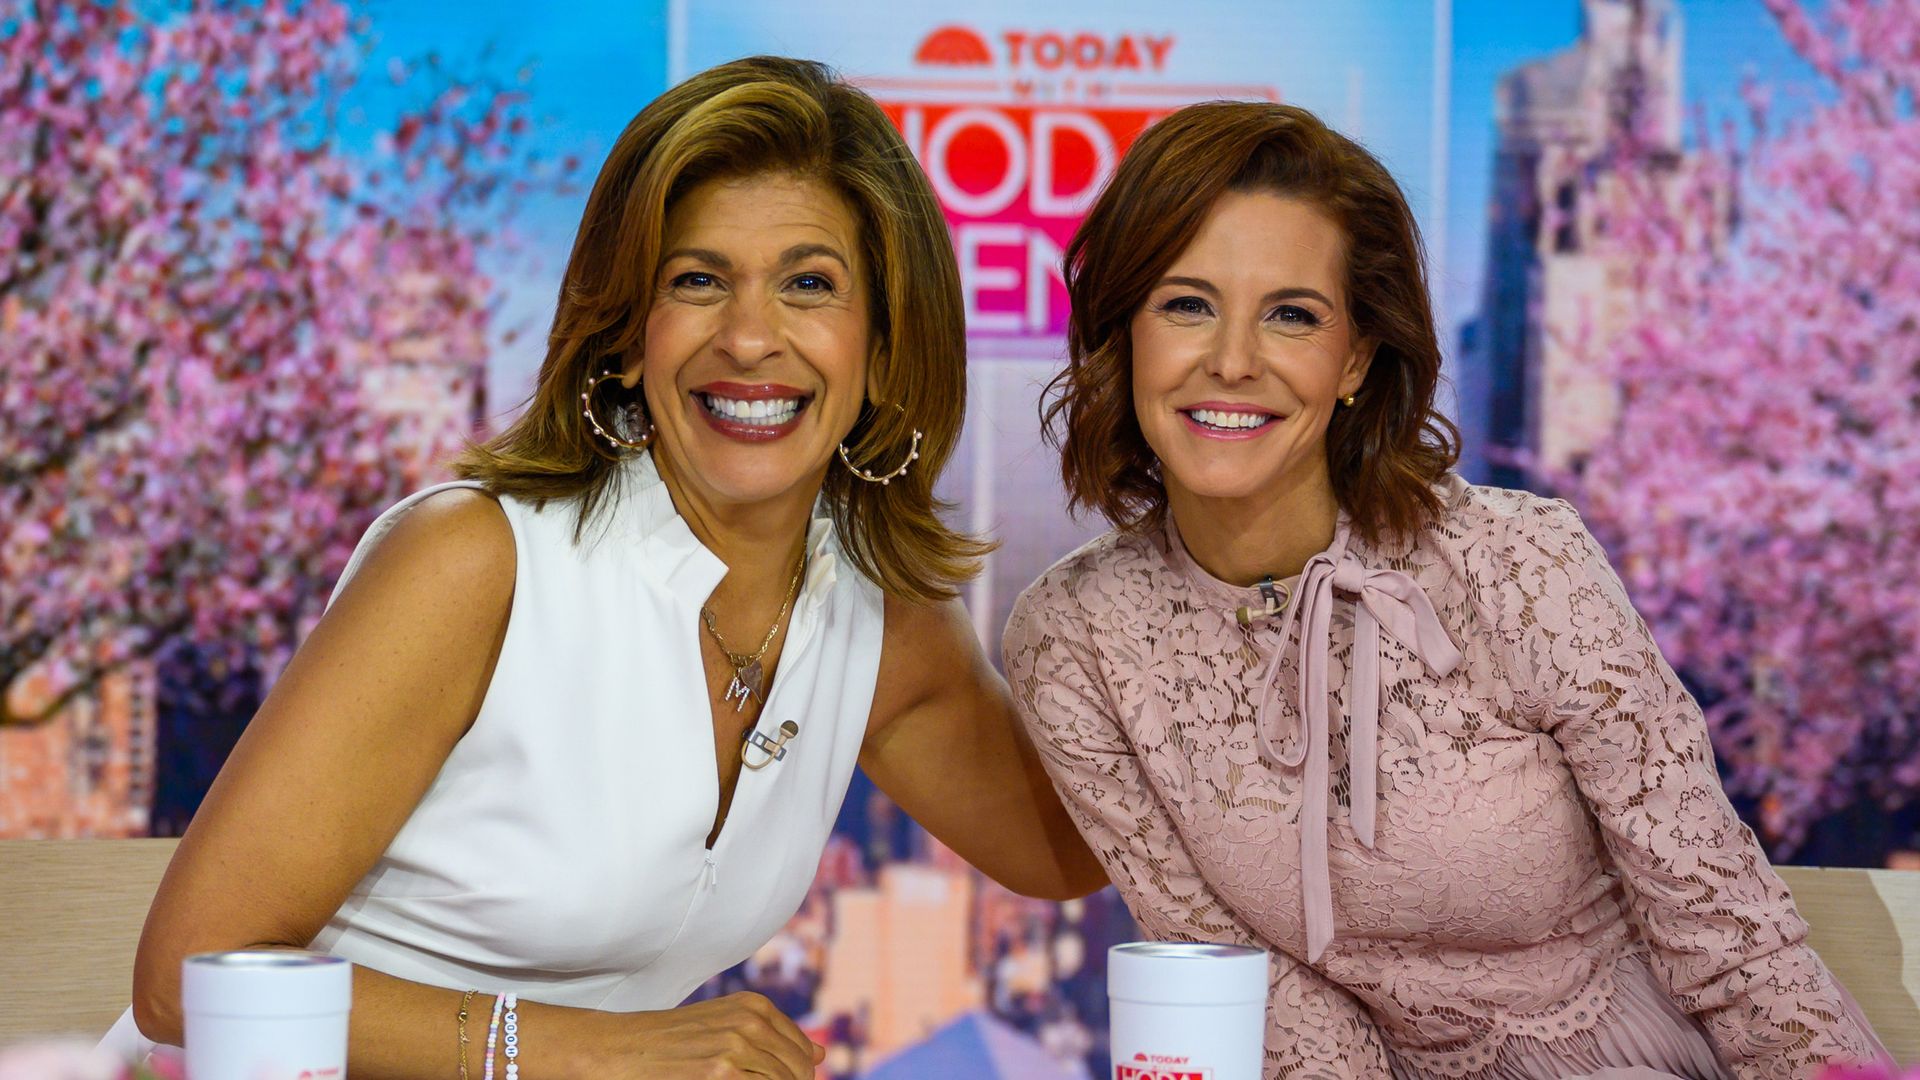 TODAY -- Pictured: Hoda Kotb and Stephanie Ruhle on Thursday May 5, 2022